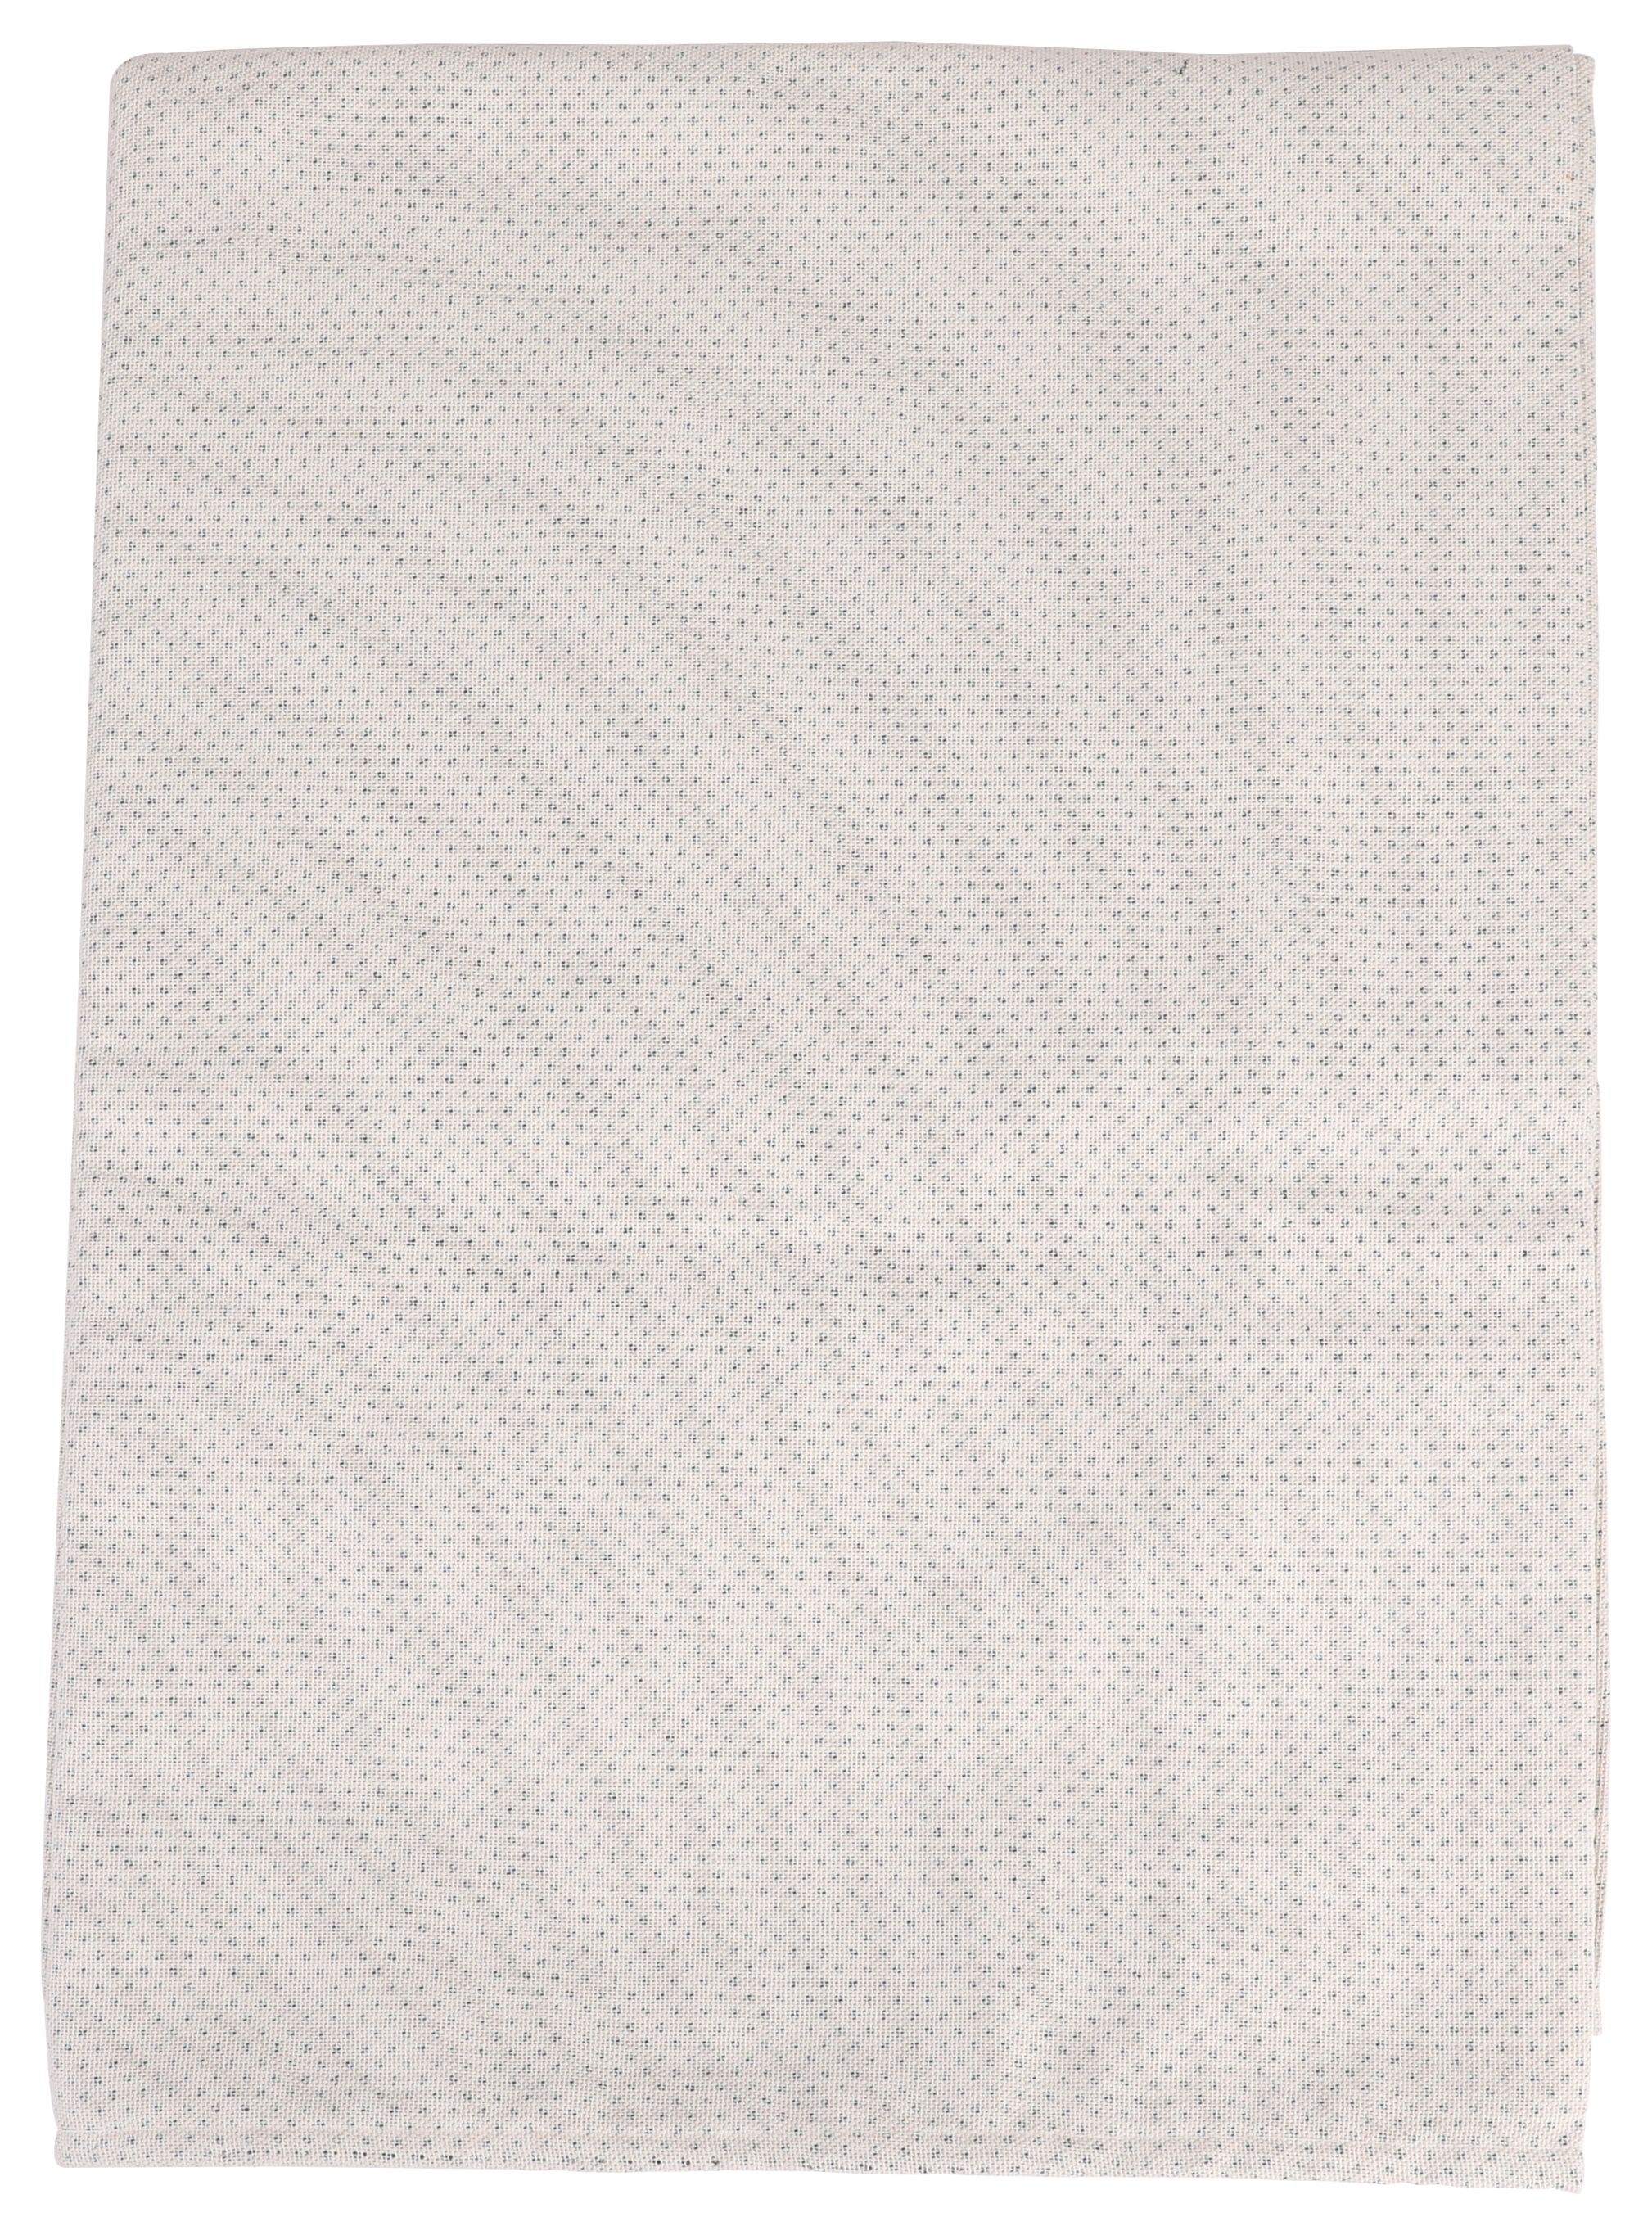 Image of Cotton Non Slip Safety Drop Cloth / Dust Sheet - 1 x 3m